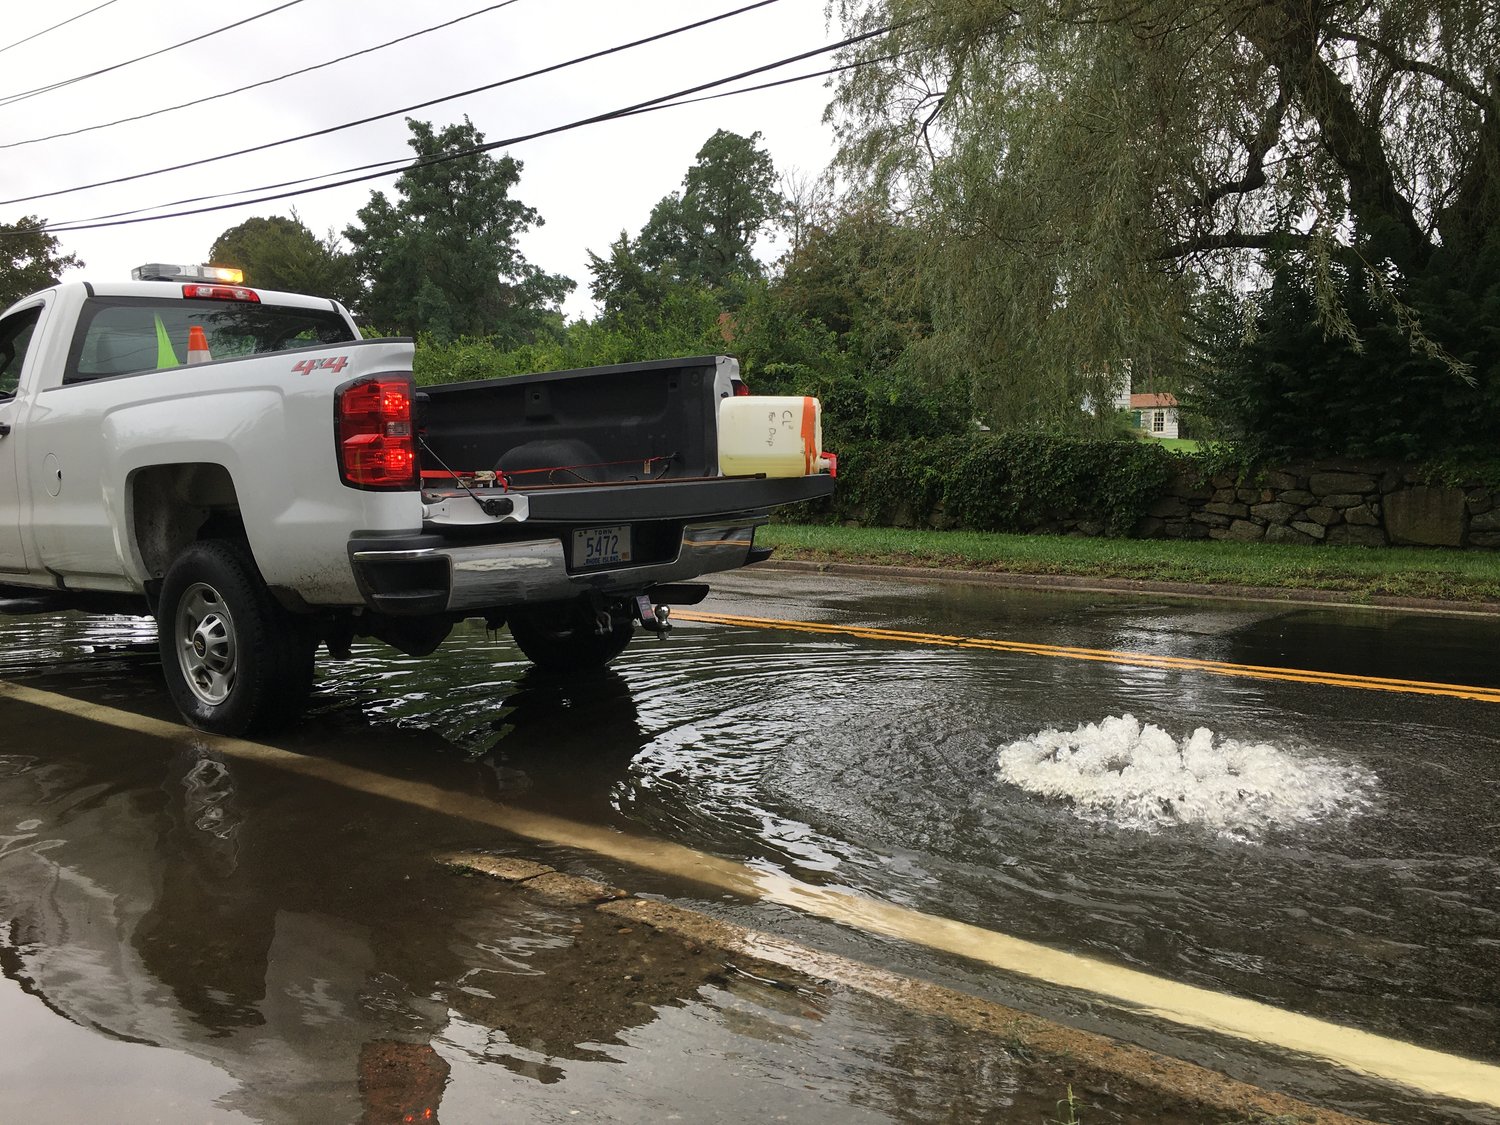 A Bristol Water Pollution Control crew was dripping chlorine into the streets as a way to help treat the untreated sewage and groundwater overwhelming the system.